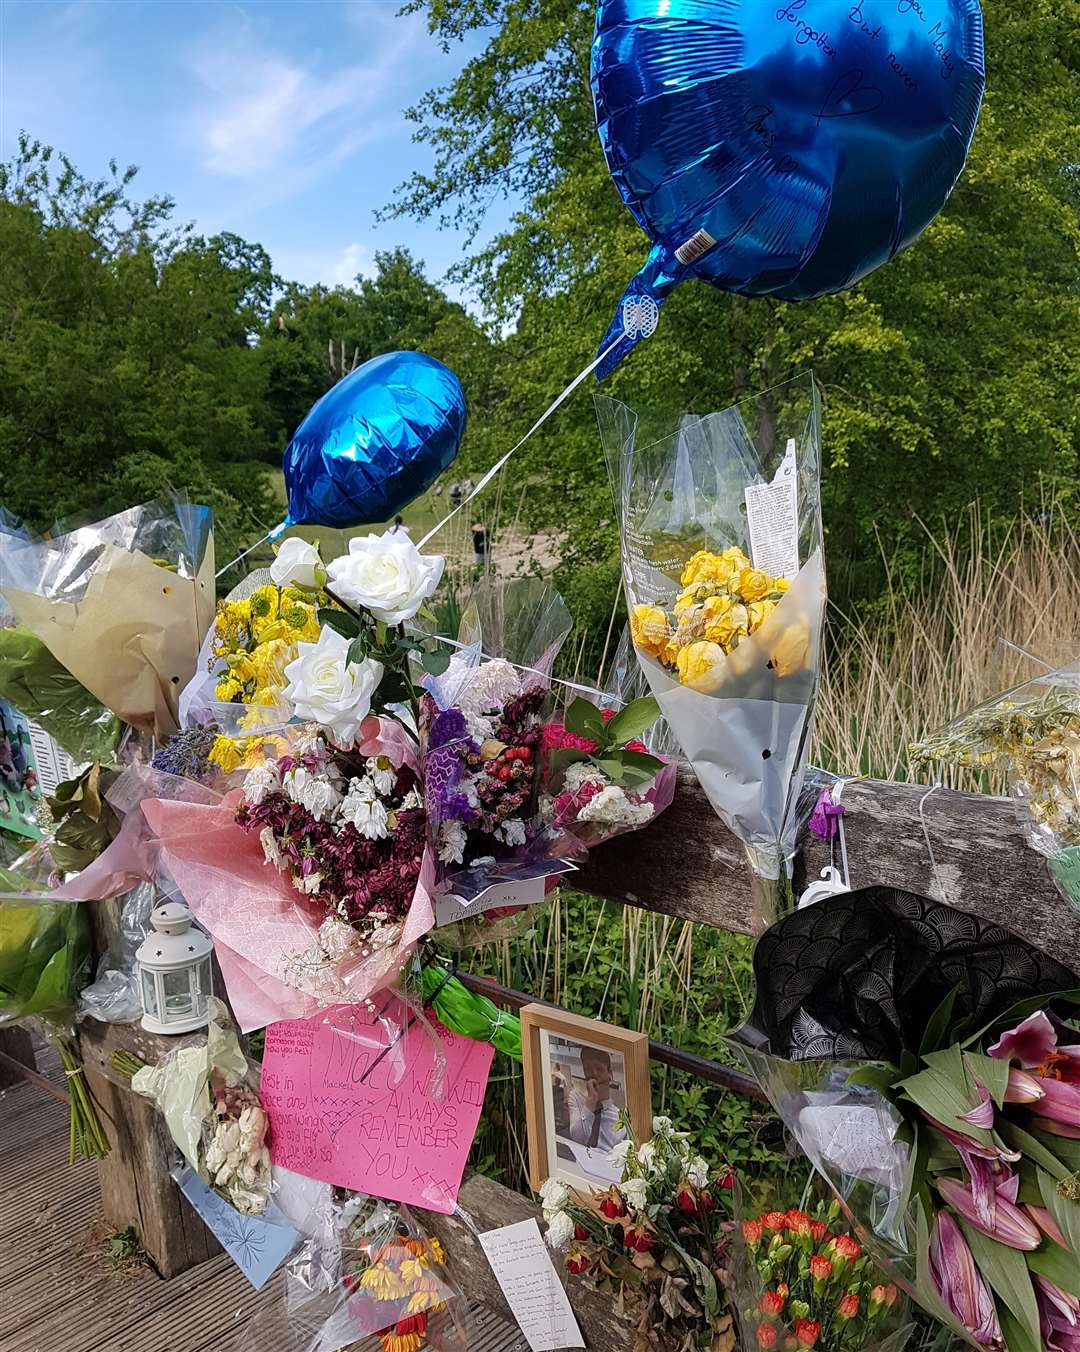 Flowers and messages were left at Dunorlan Park in Tunbridge Wells in Matthew's memory.